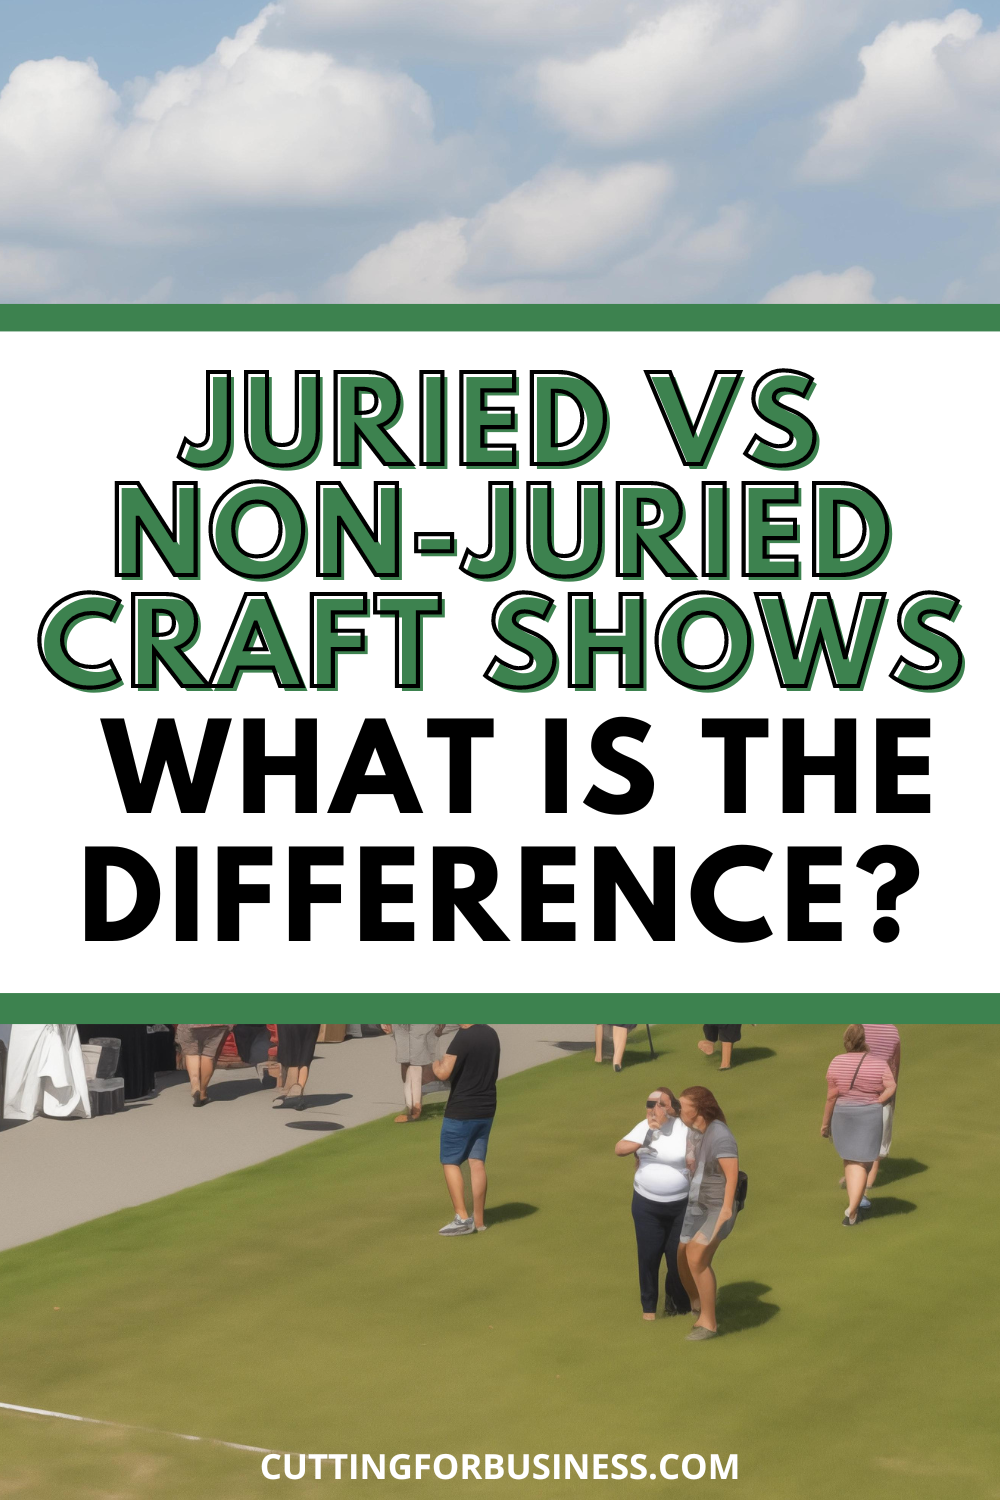 Juried vs Non-Juried Craft Shows - What is the Difference? - cuttingforbusiness.com